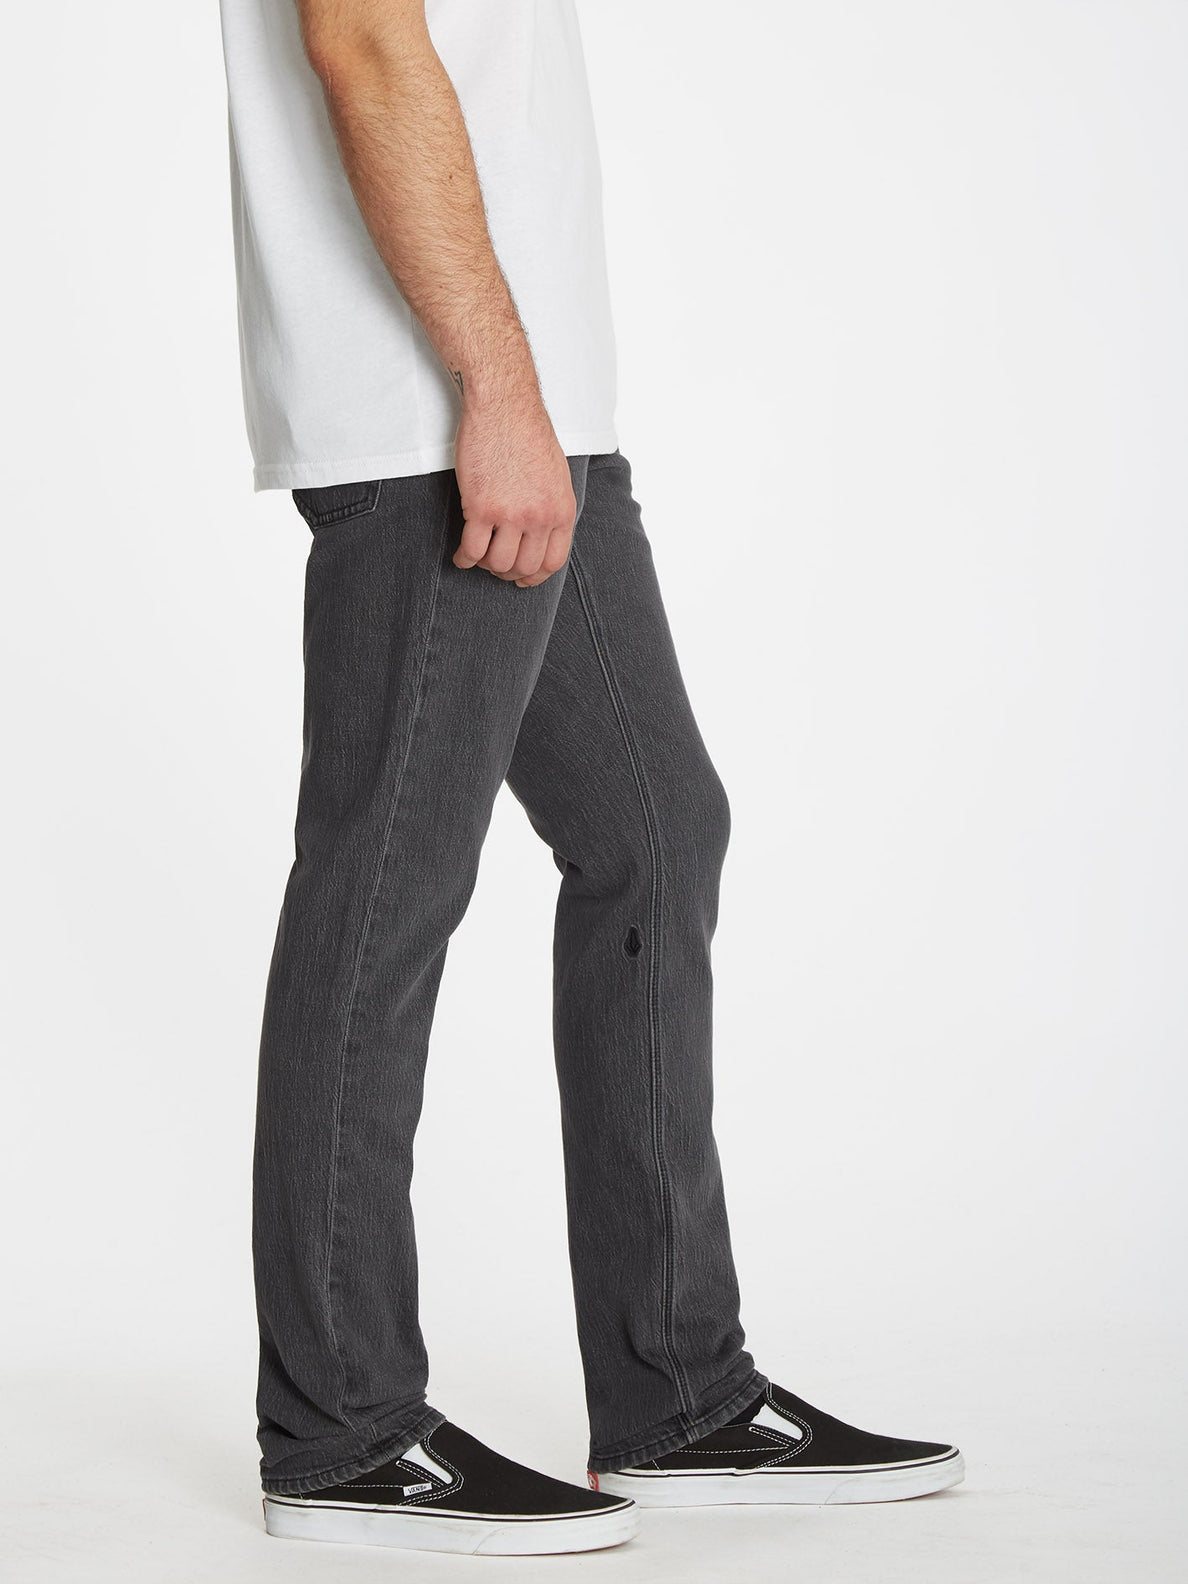 Solver Tapered Jeans - STONEY BLACK (A1932201_STY) [3]